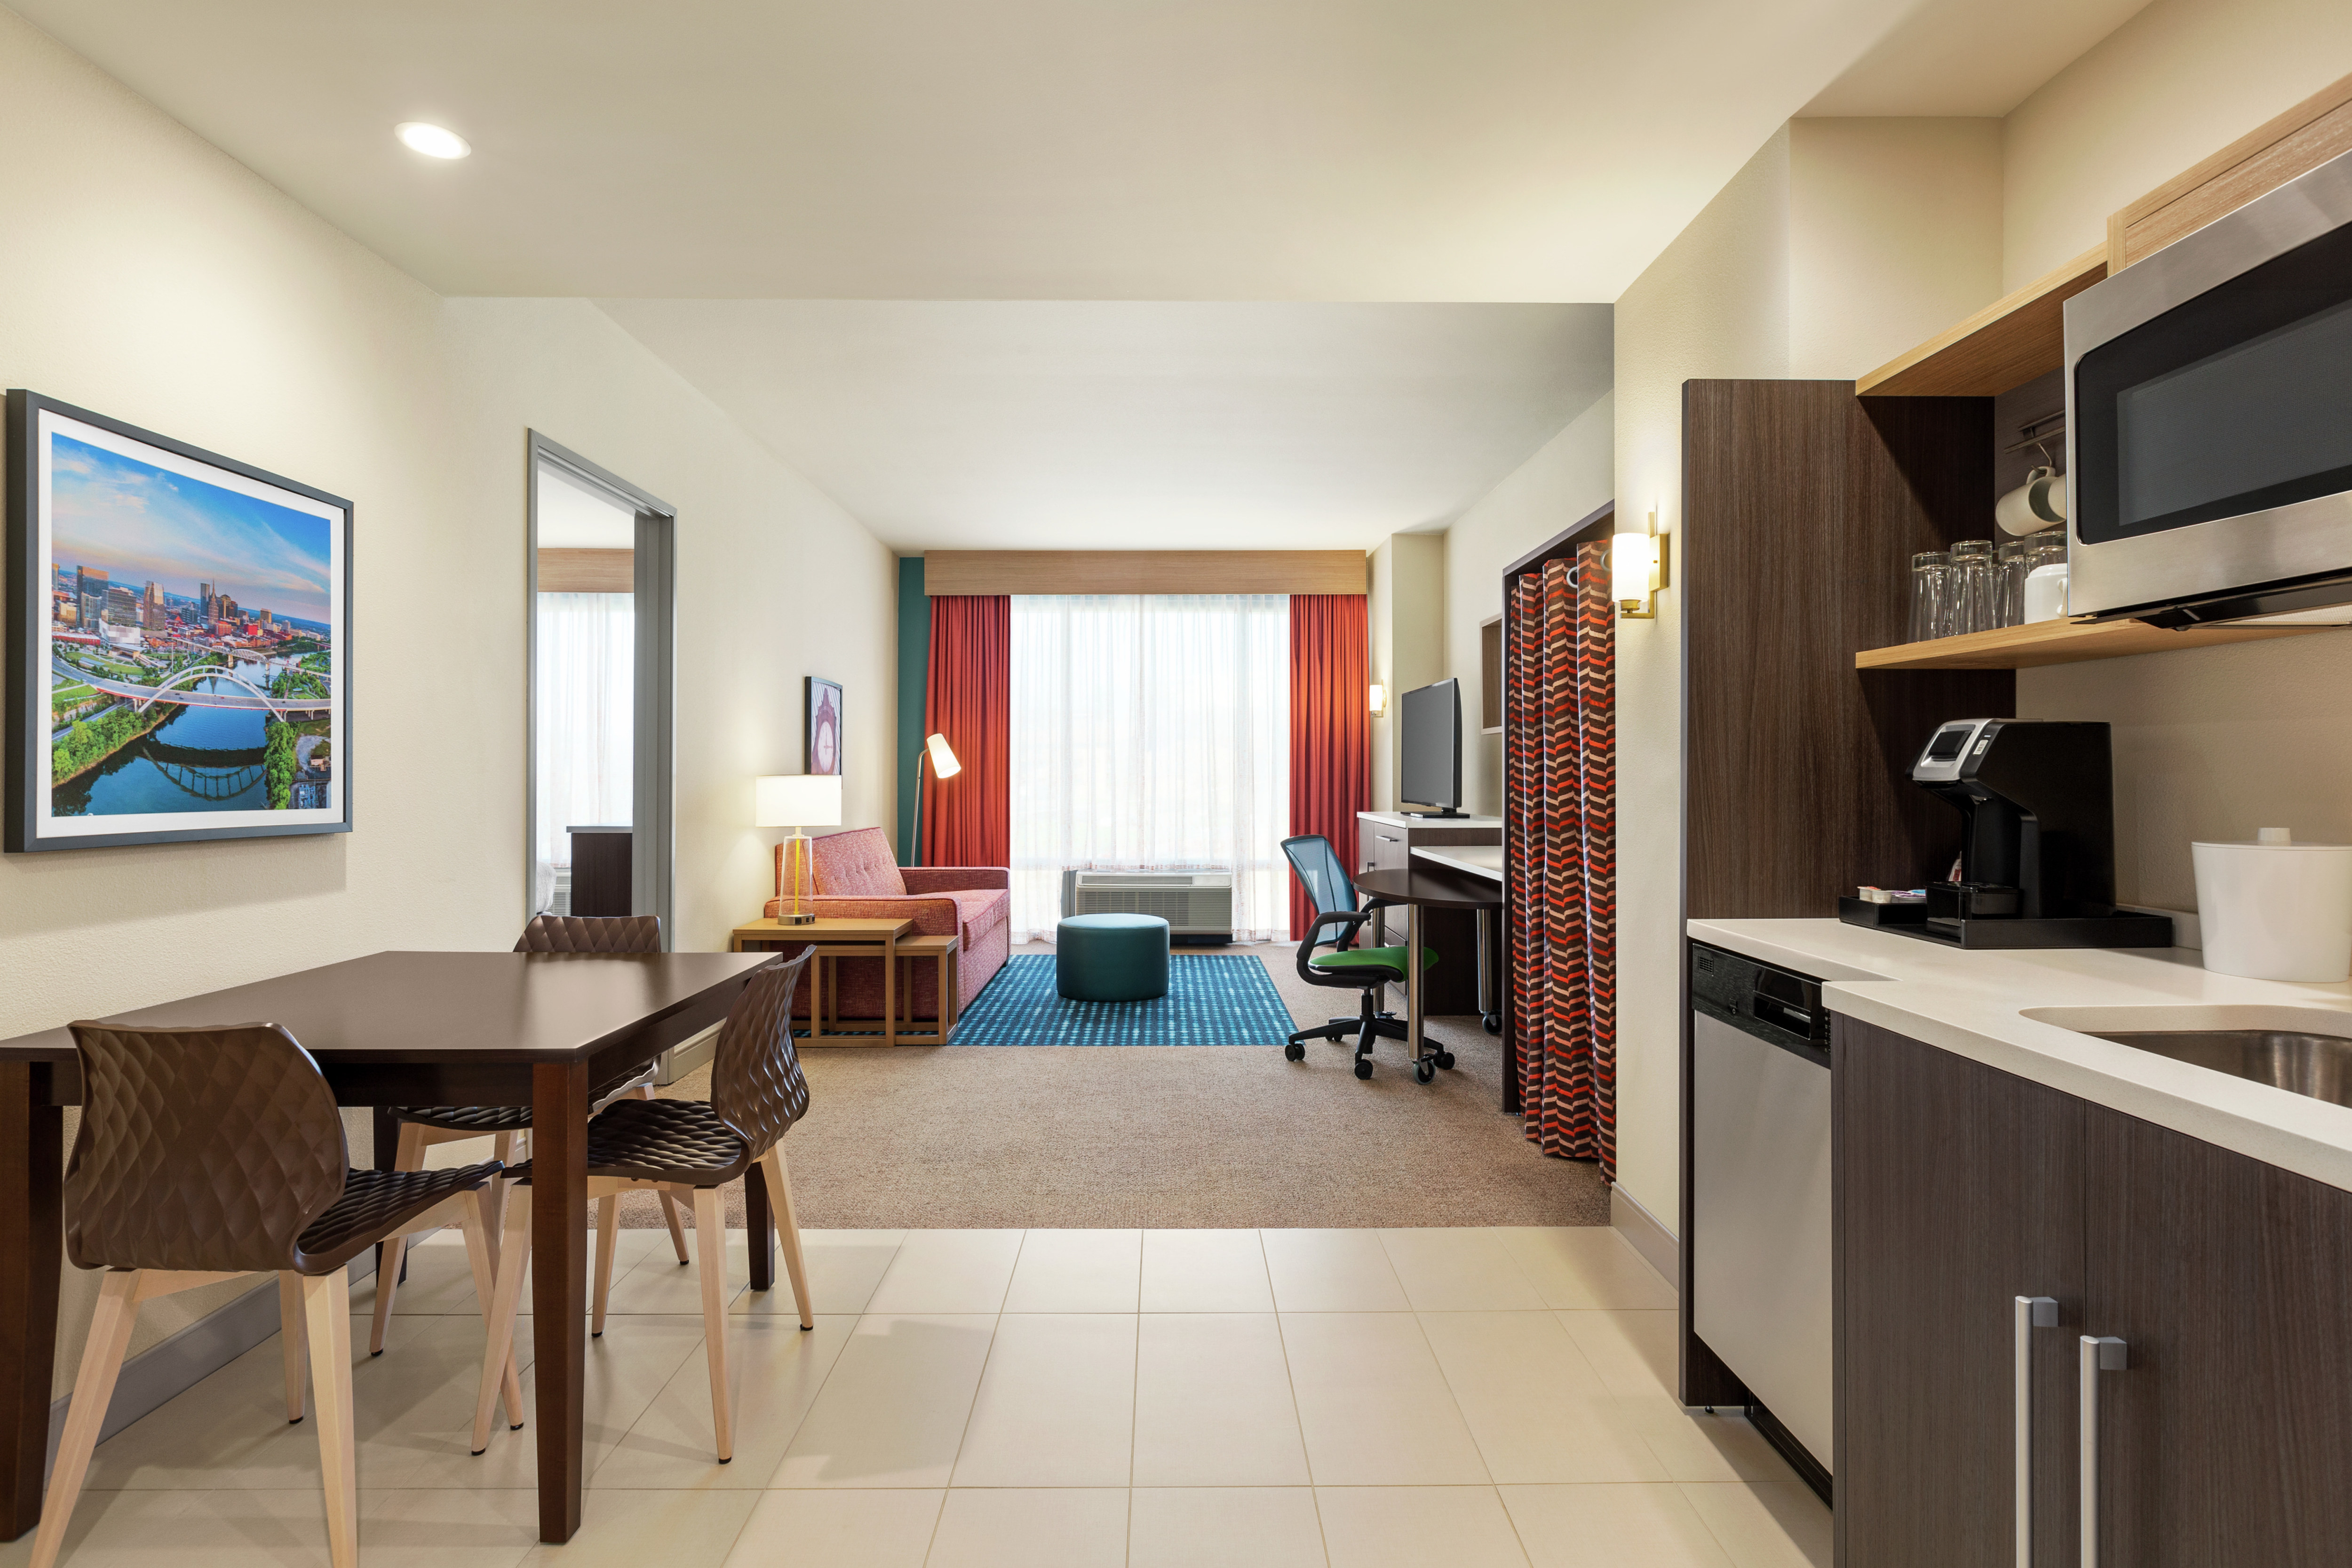 Spacious living area in suite featuring fully equipped kitchen, dining area, and lounge with sofa.